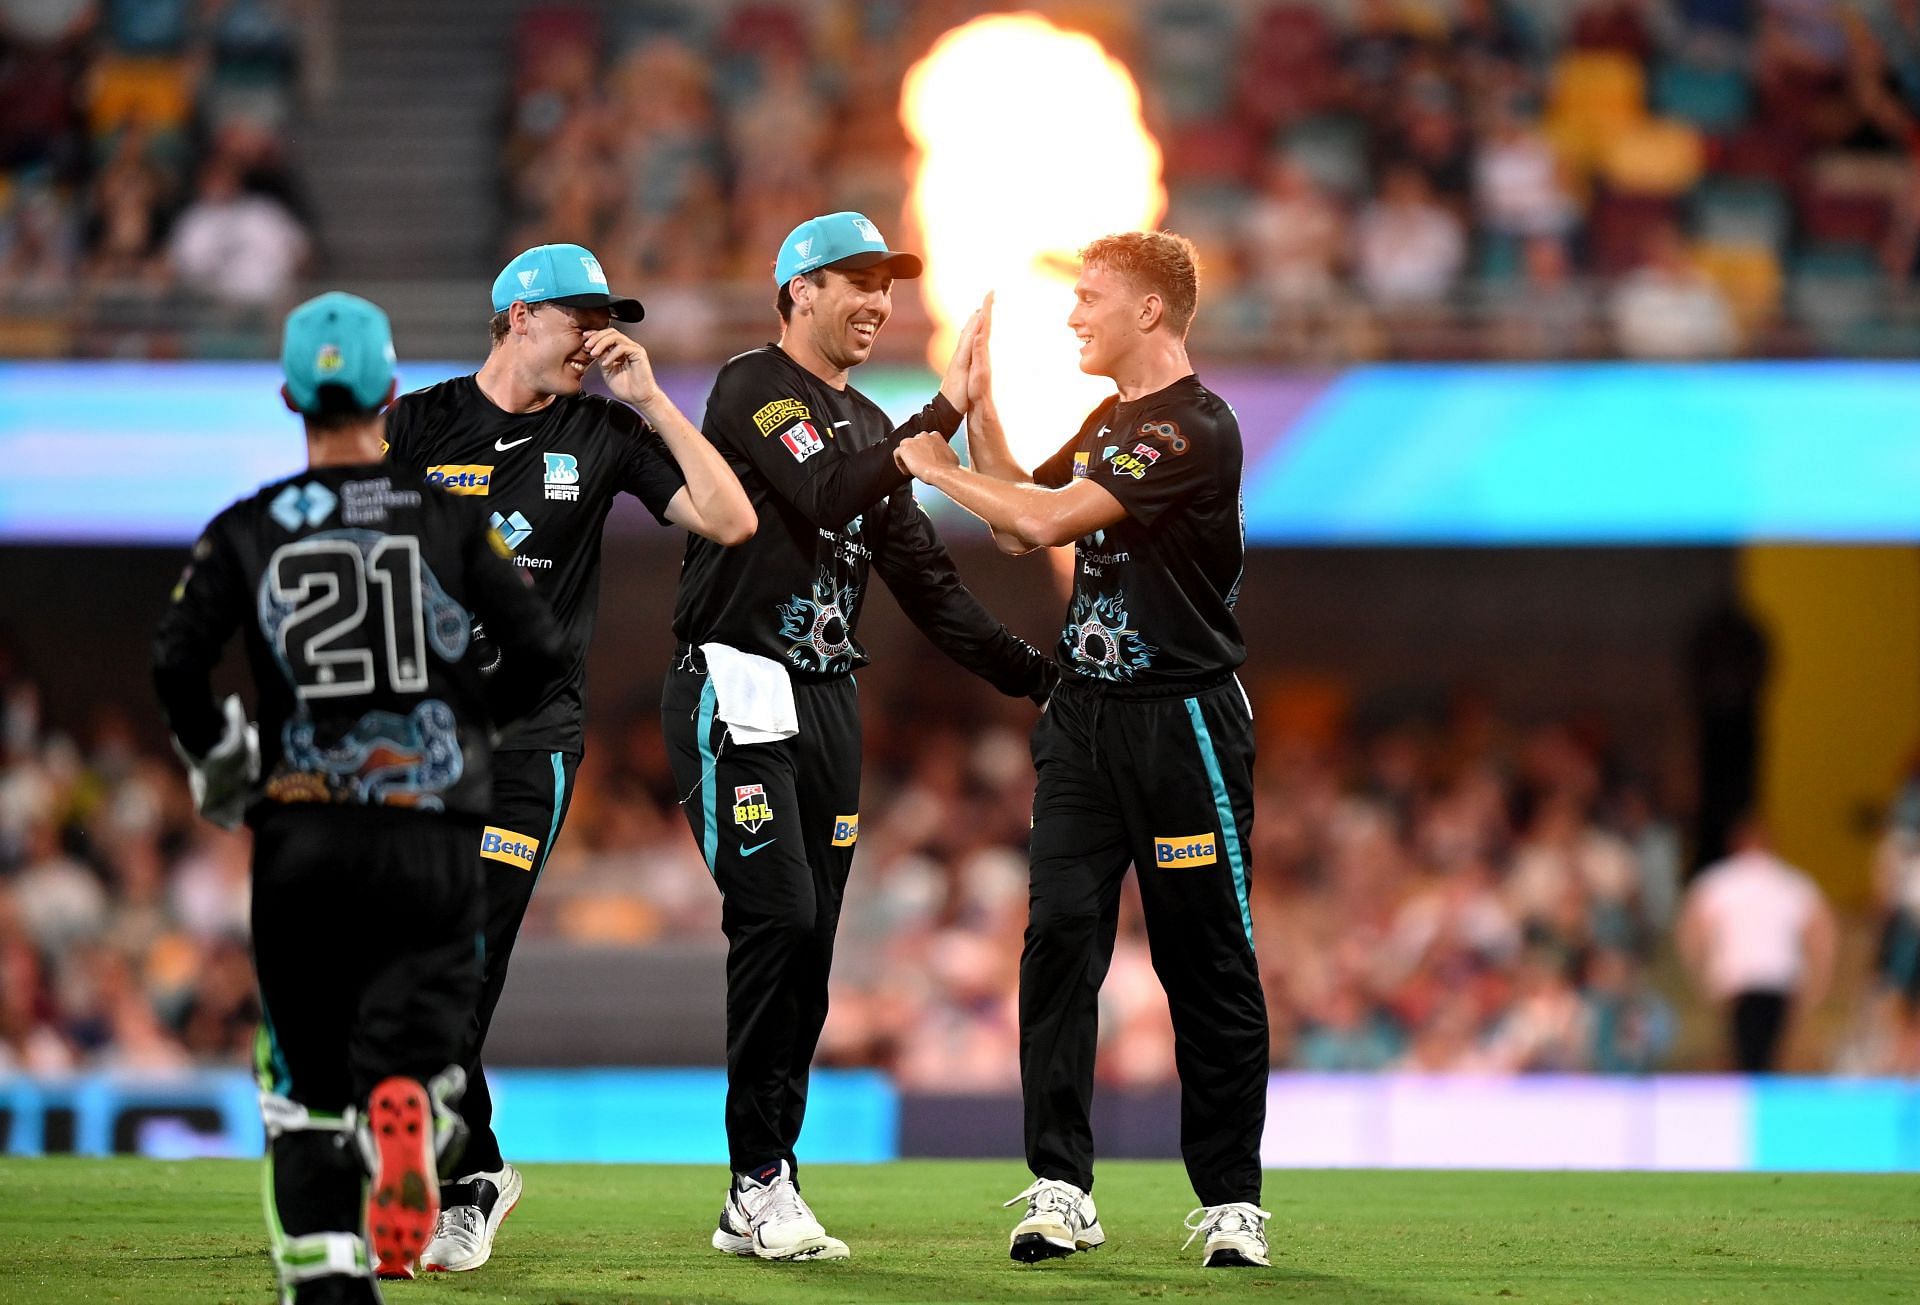 Big Bash League 2021, Brisbane Heat vs Adelaide Strikers Probable XIs, Match Prediction, Weather Forecast, Pitch Report and Live Streaming Details